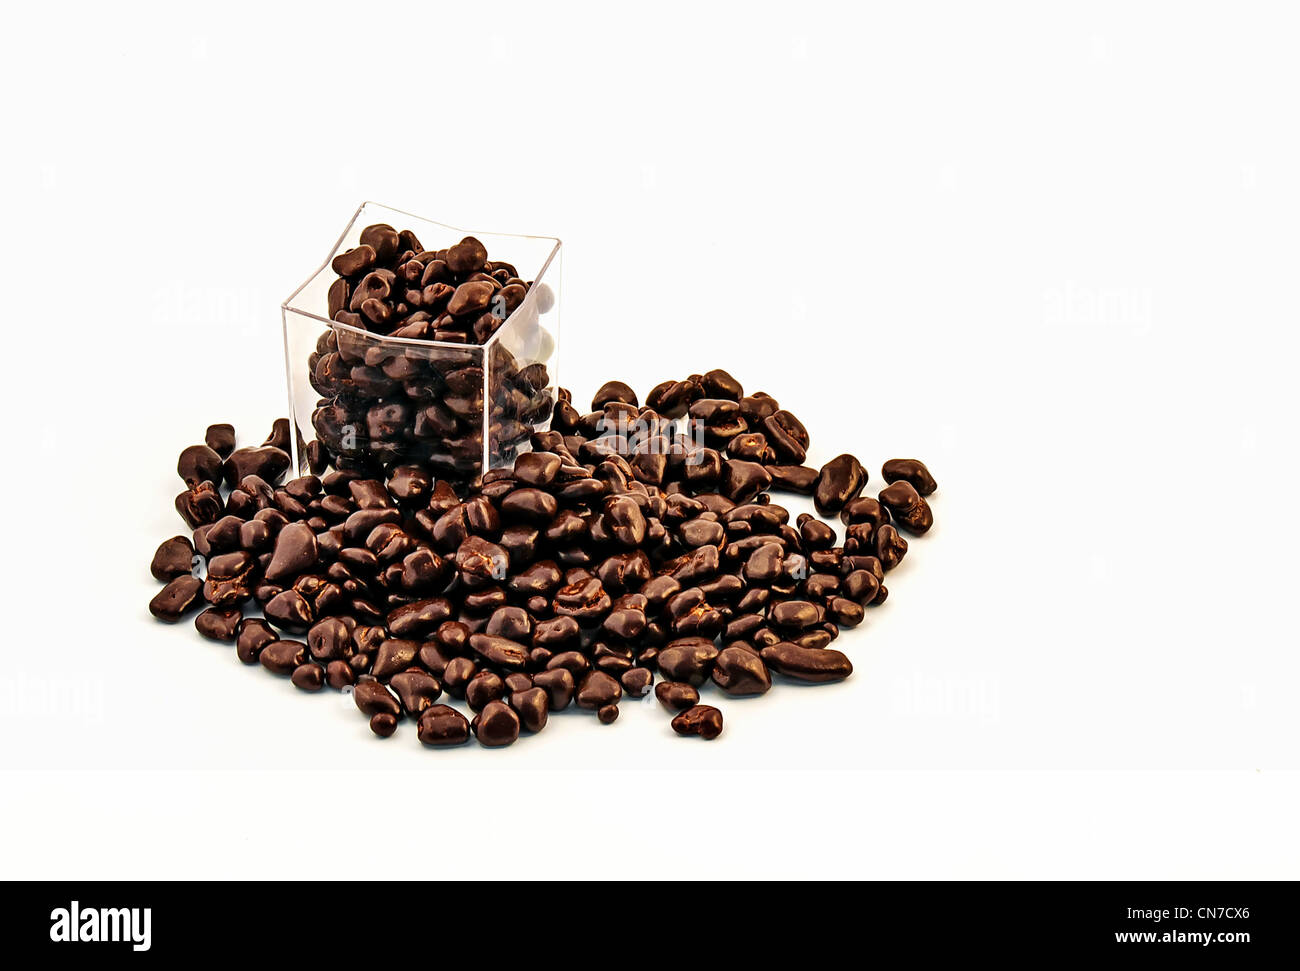 Group of chocolate beans isolated on white background Stock Photo